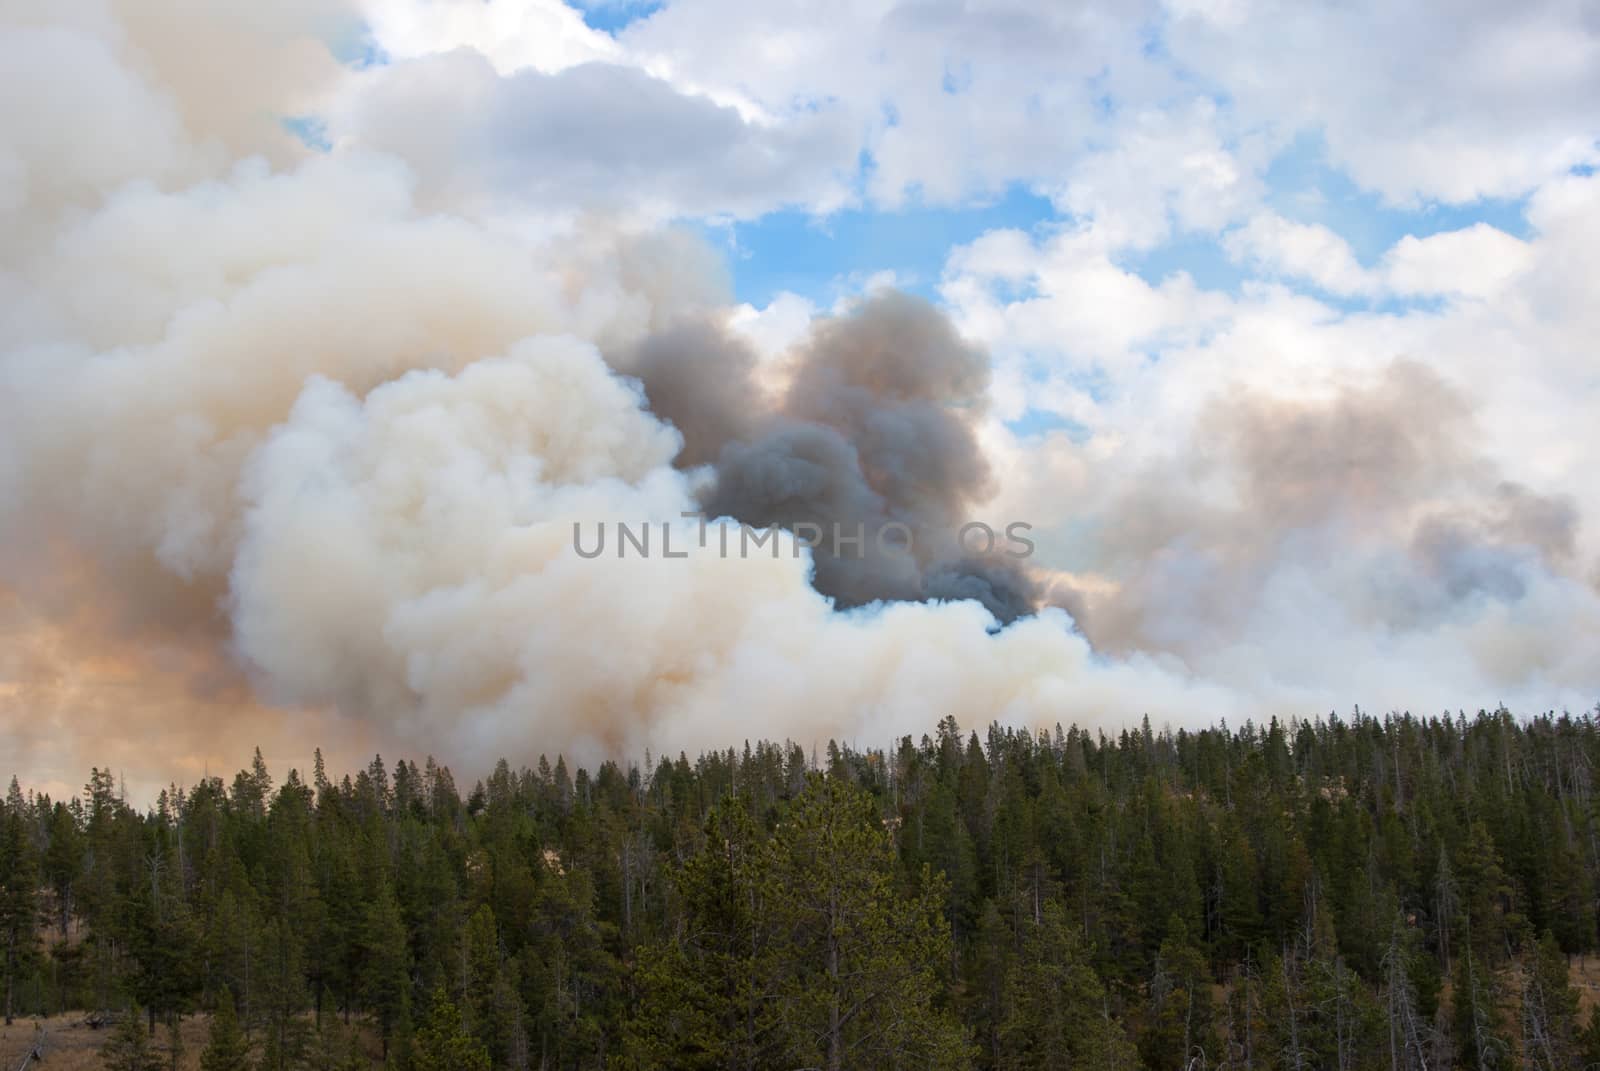 Forest fire in Yellowstone National Park, Wyoming USA